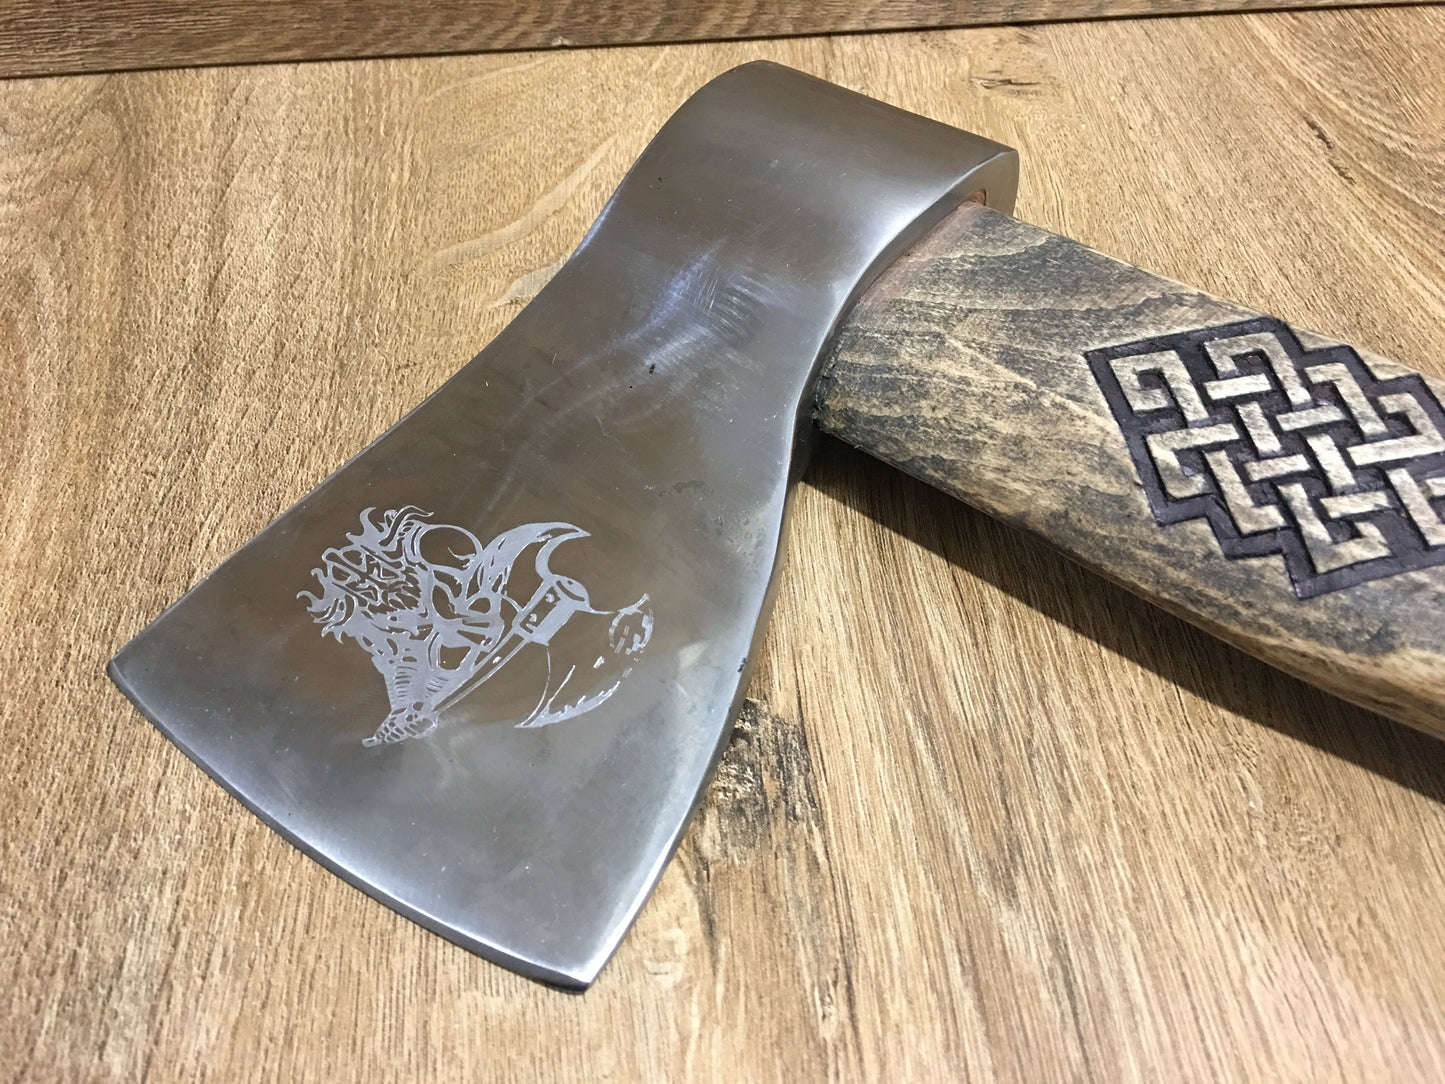 Custom axe, customized axe, etched axe head, personalized axe, military ax, viking axe, medieval axe, tomahawk, mens gift, iron gift for him